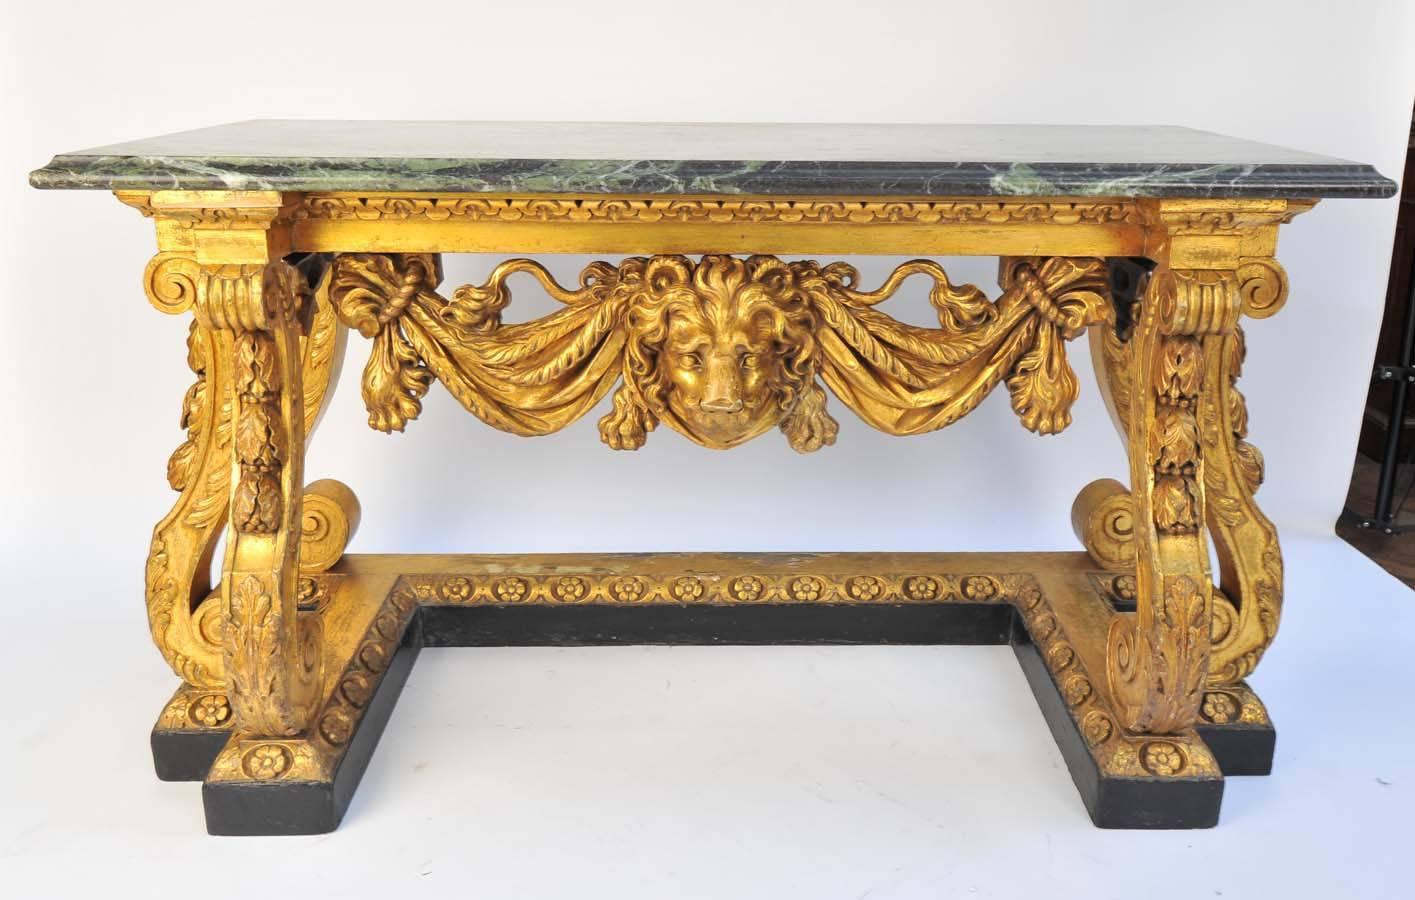 A very impressive pair of mid-19th century gilded marble-topped console tables, in the manner of William Kent, having scrolling, swag and dragoon decoration with lion masks to the centre.